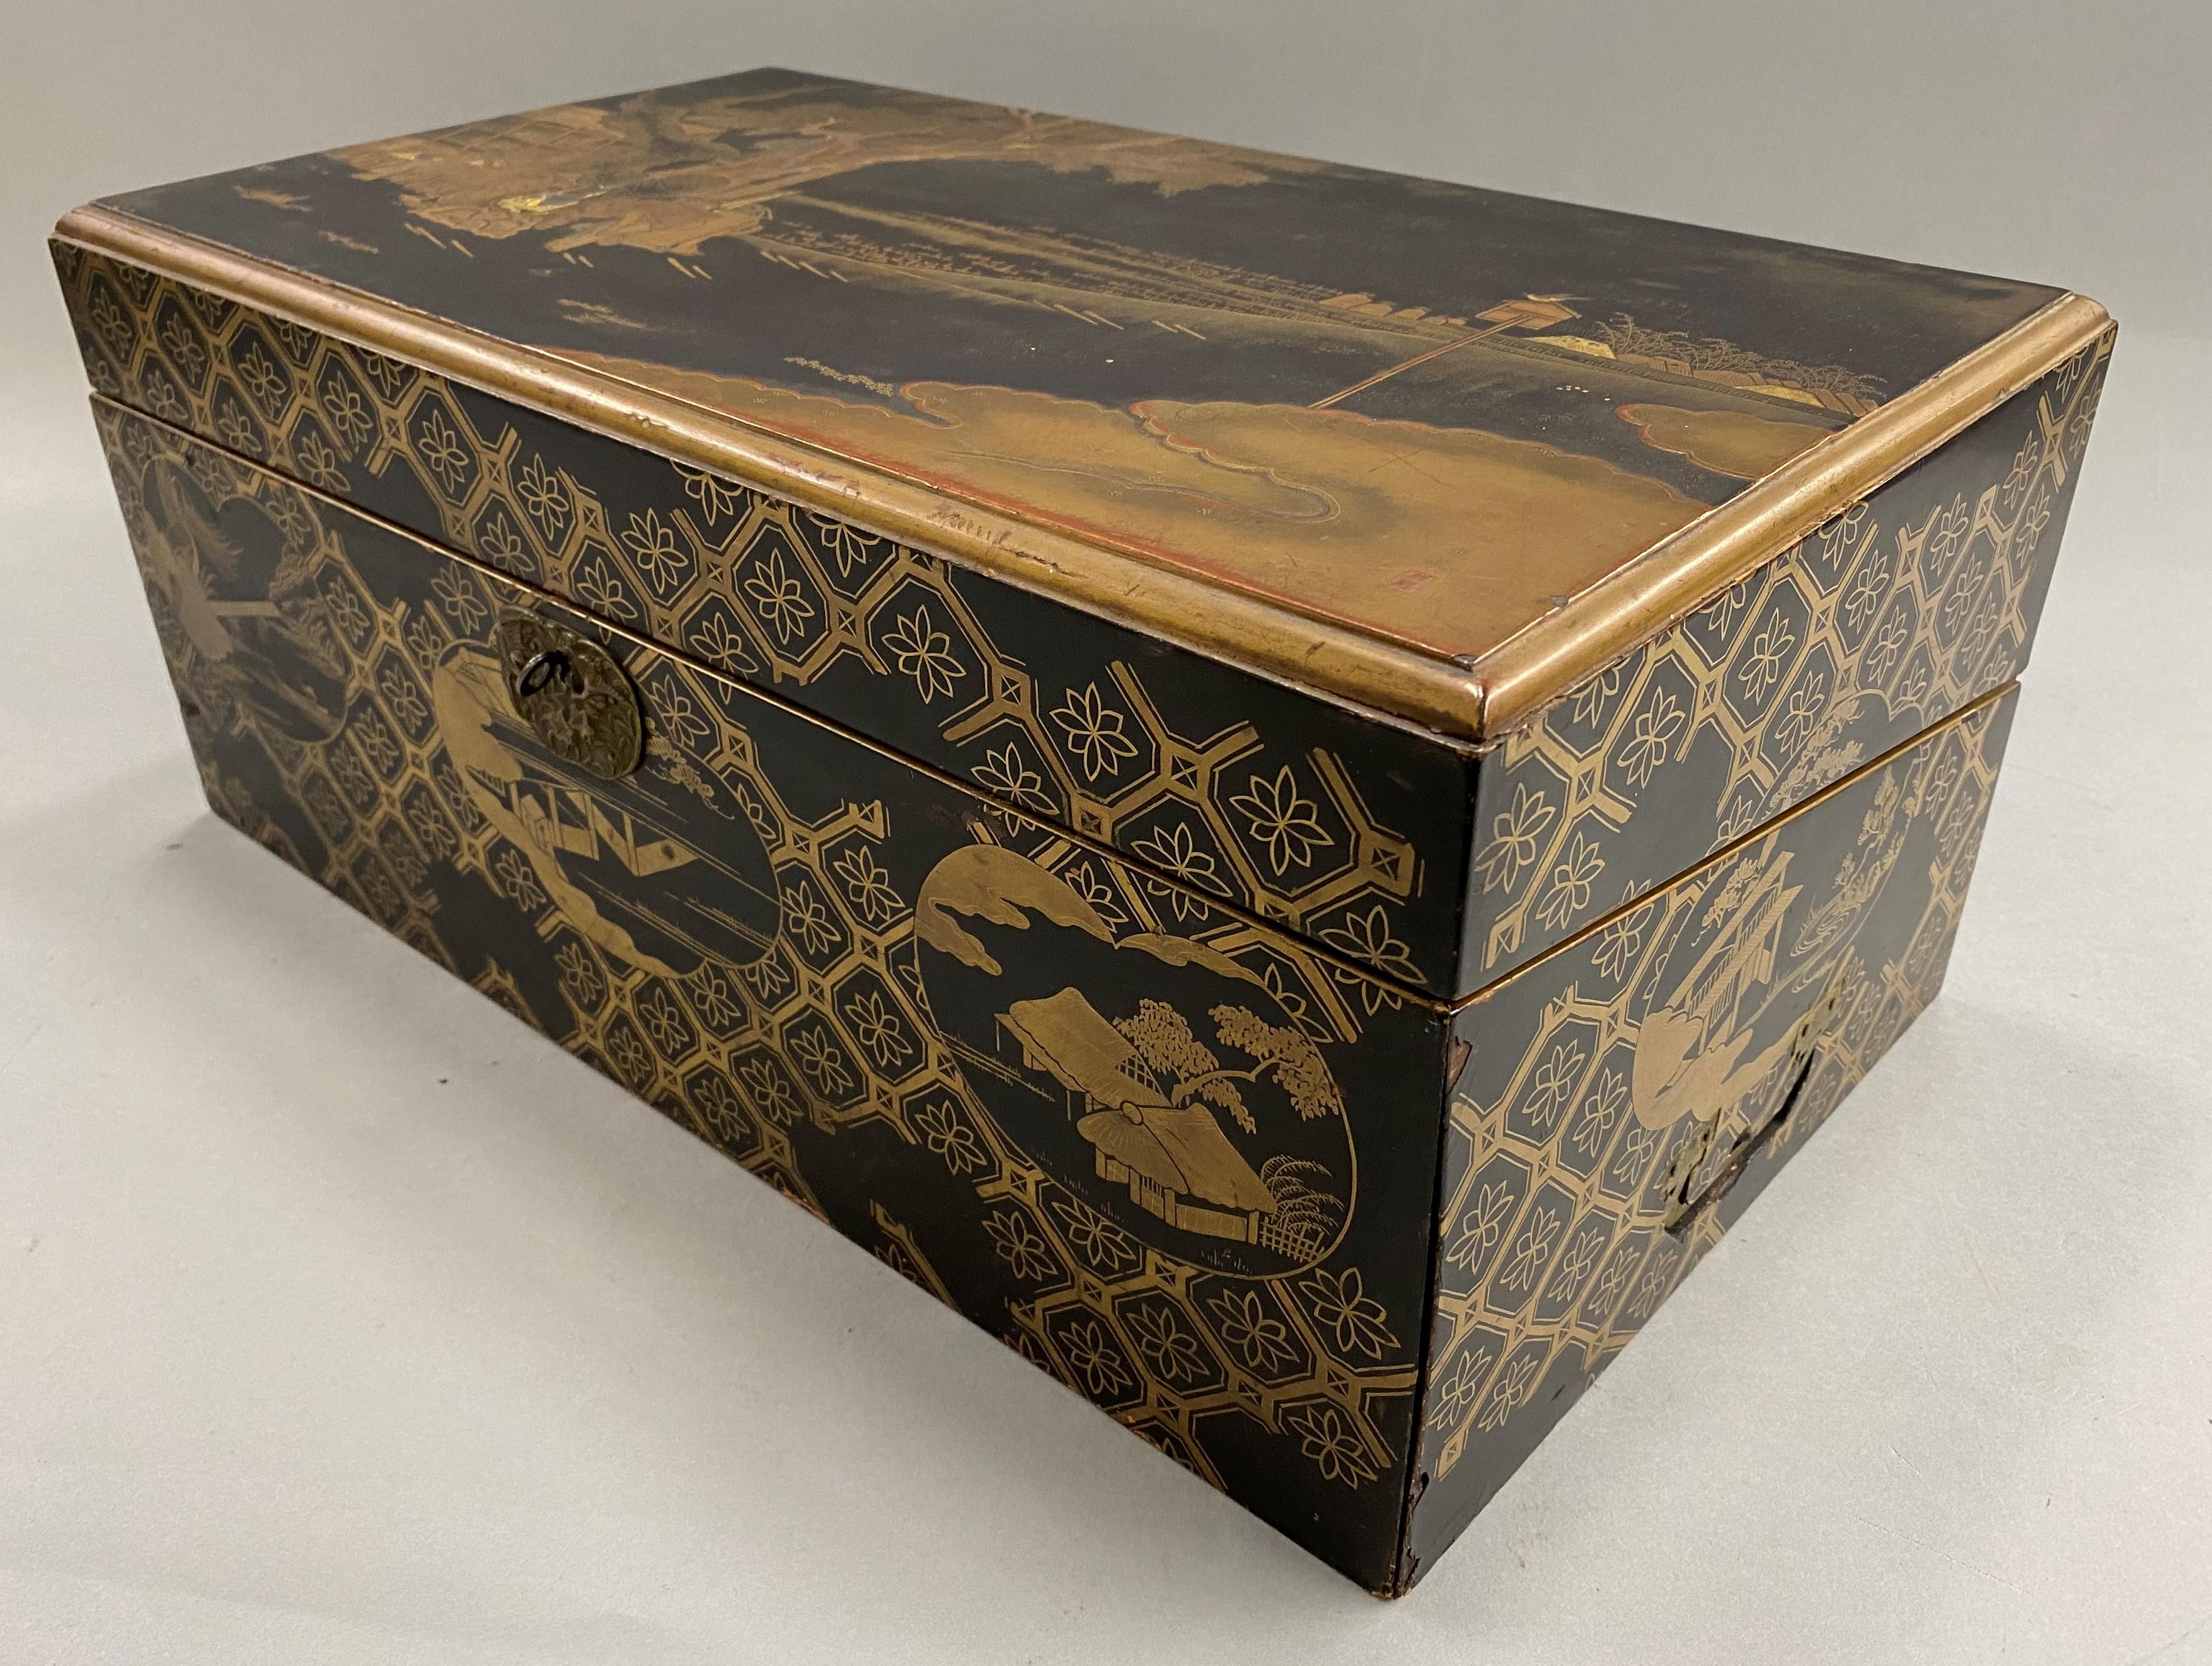 of what materials is this japanese writing box made